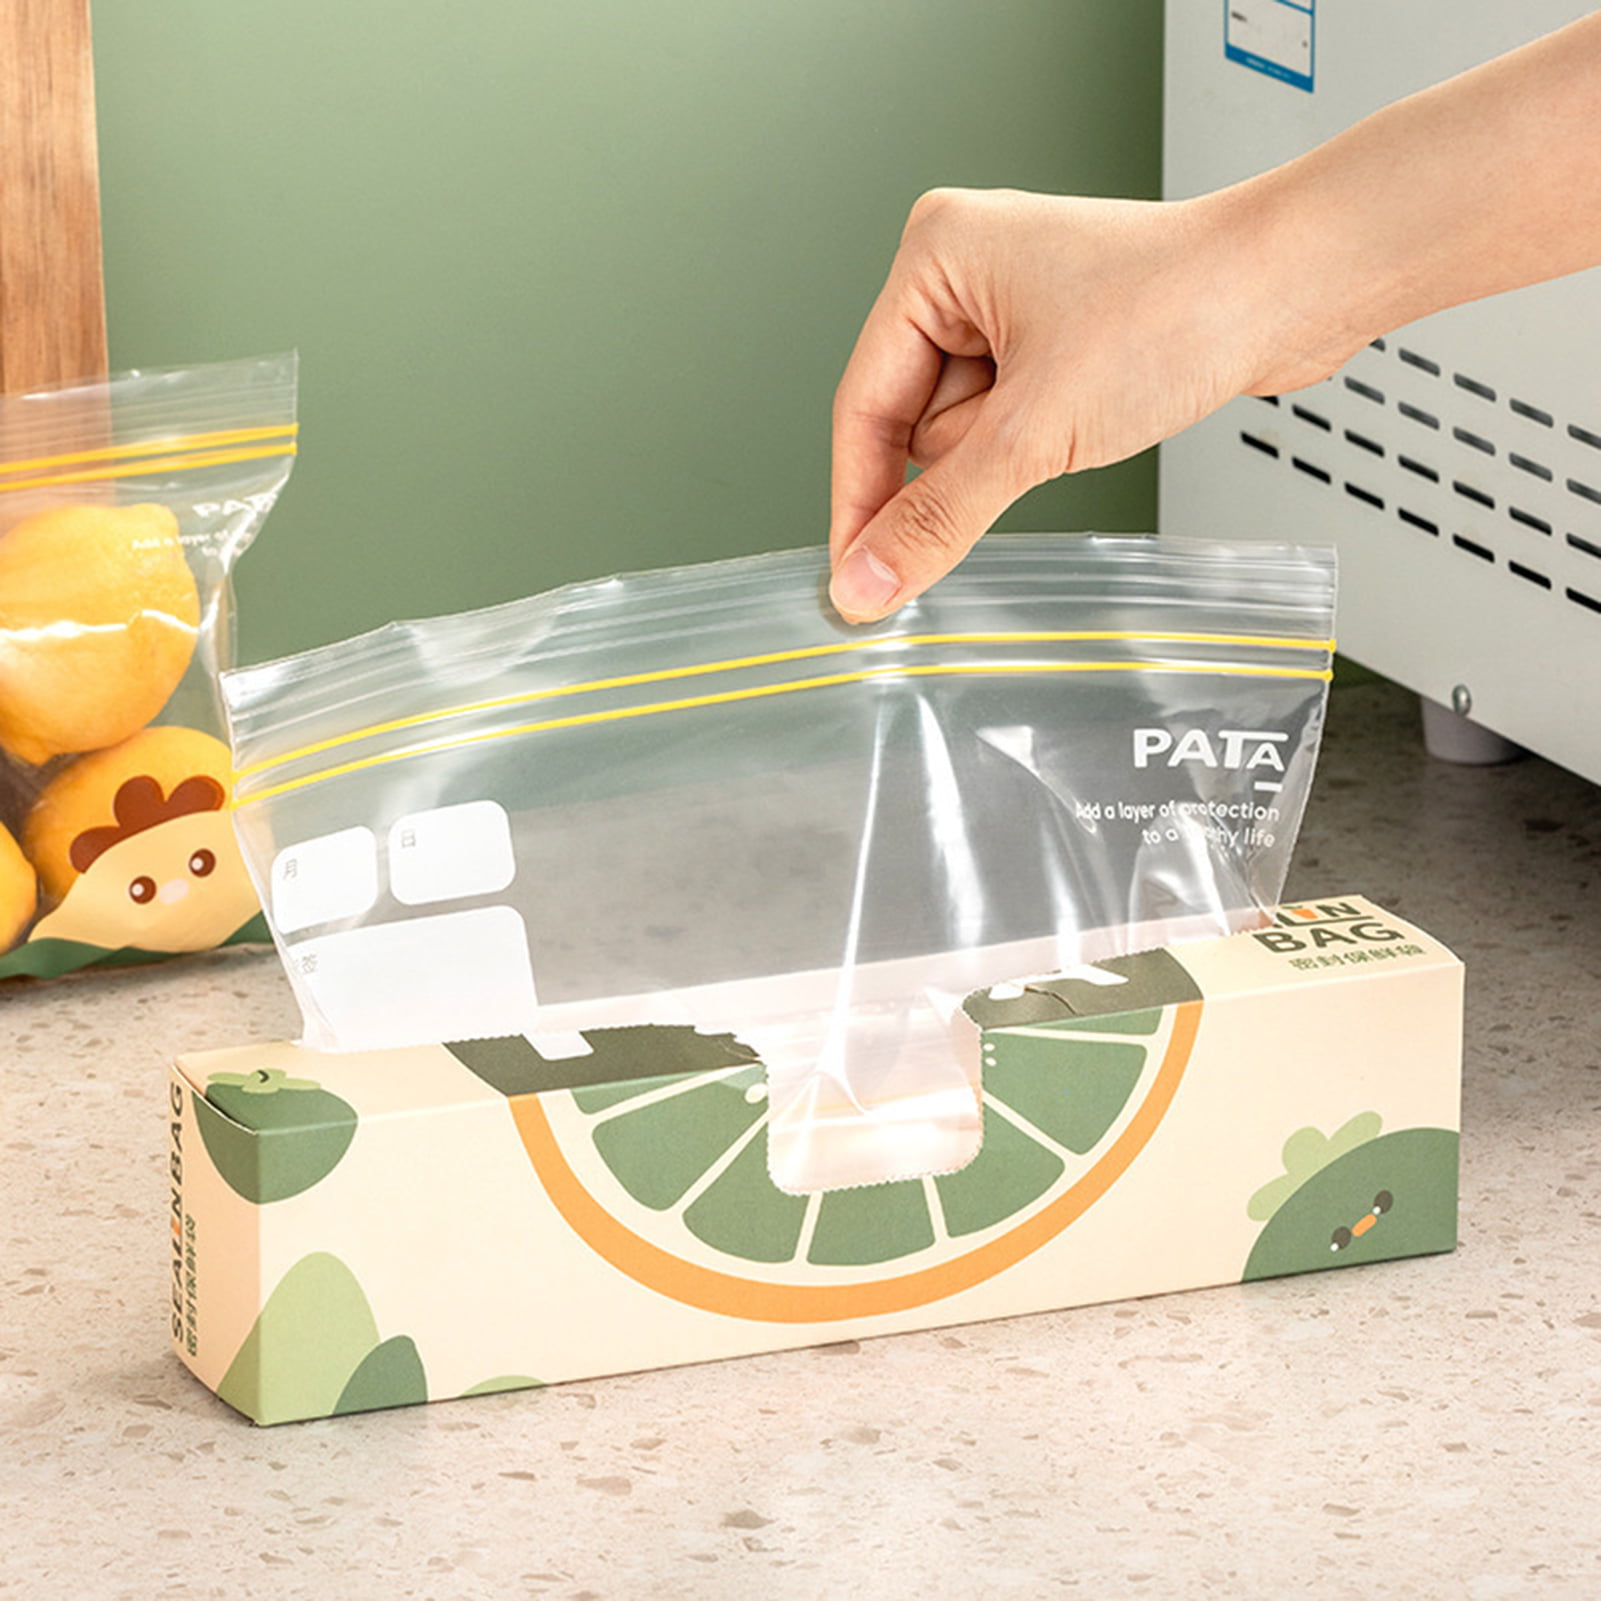 4) Large Zipper Top Storage Bag with Handles 24x 20in, Resealable Clear Bags  for Storing Organizing & Packing for Summer Travel Picnics Vacations Home  Kitchen Organizer & CUSTOM Storage Carrier 